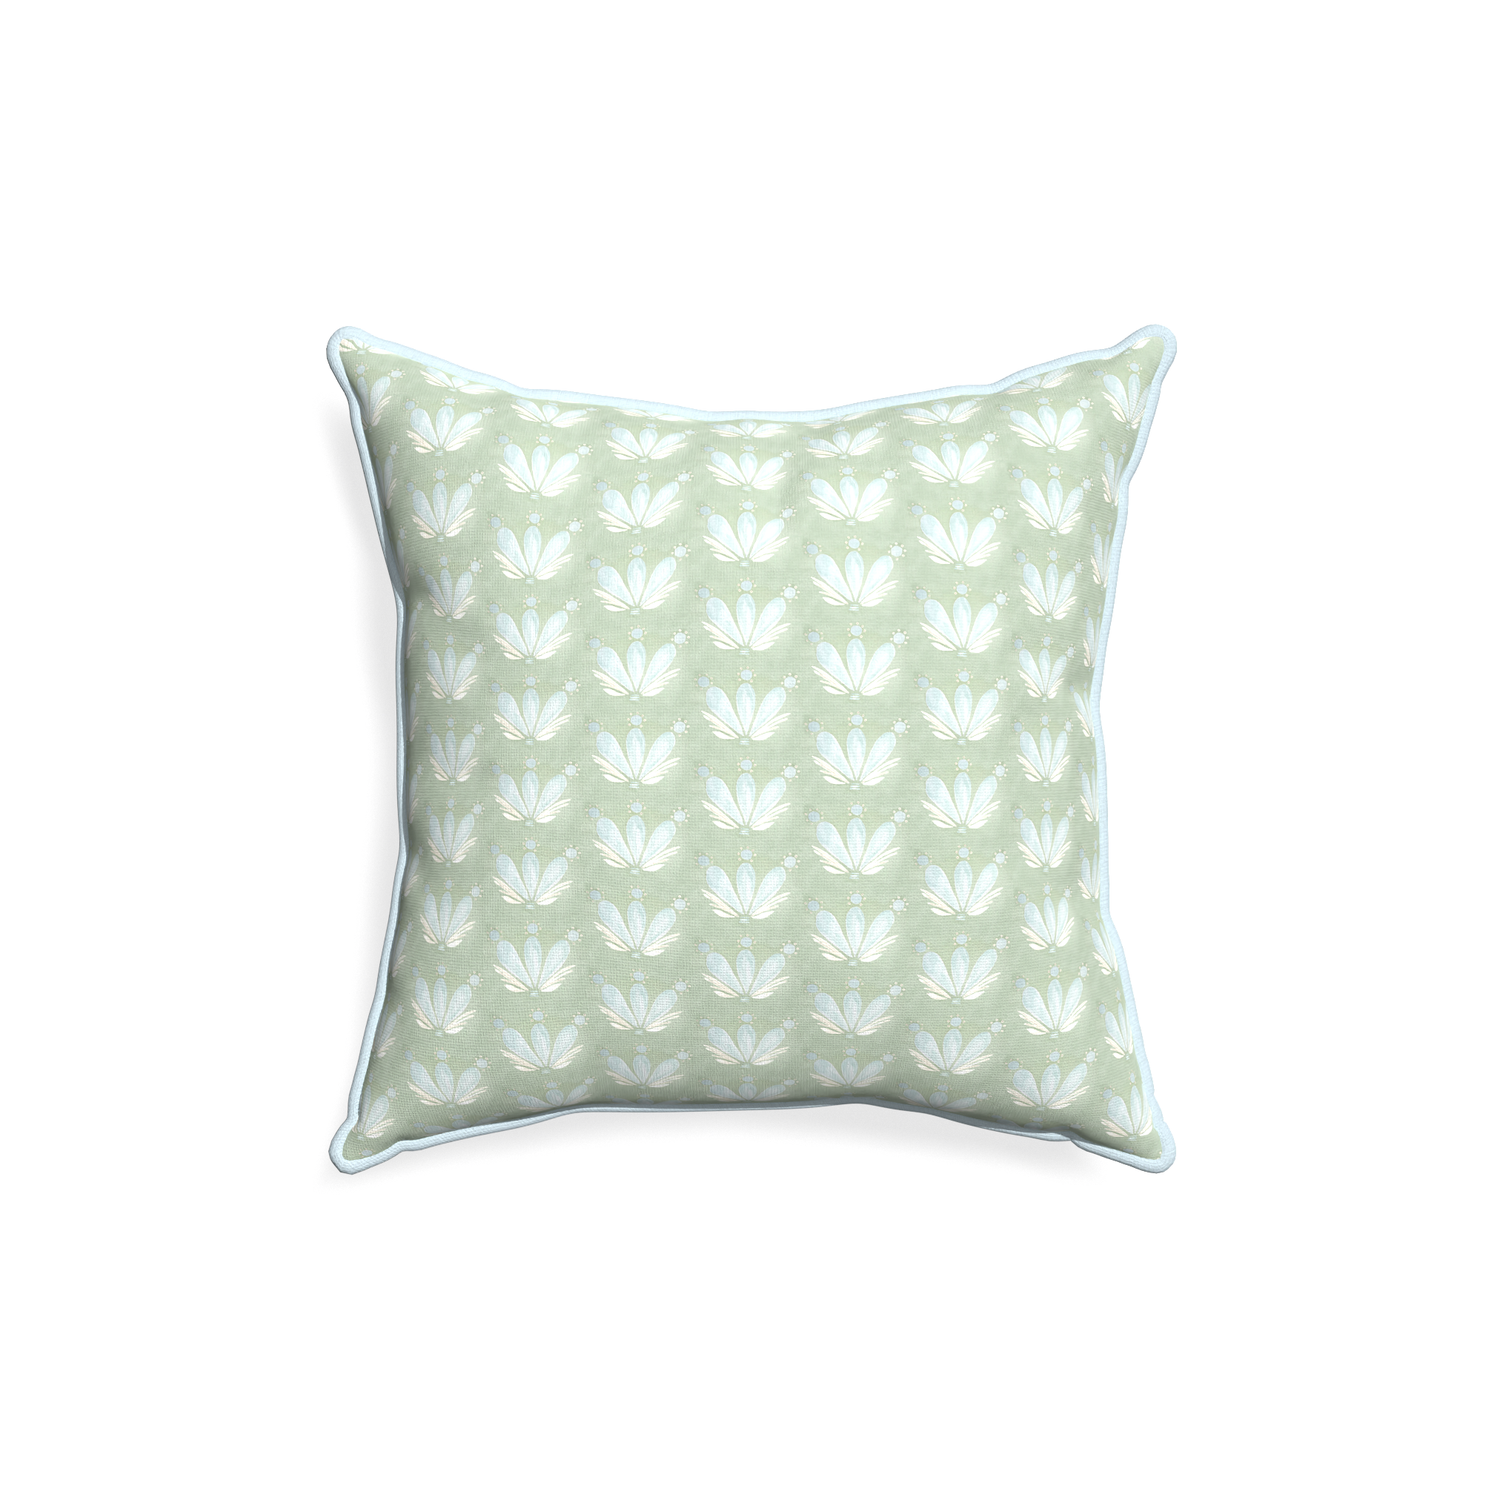 18-square serena sea salt custom blue & green floral drop repeatpillow with powder piping on white background